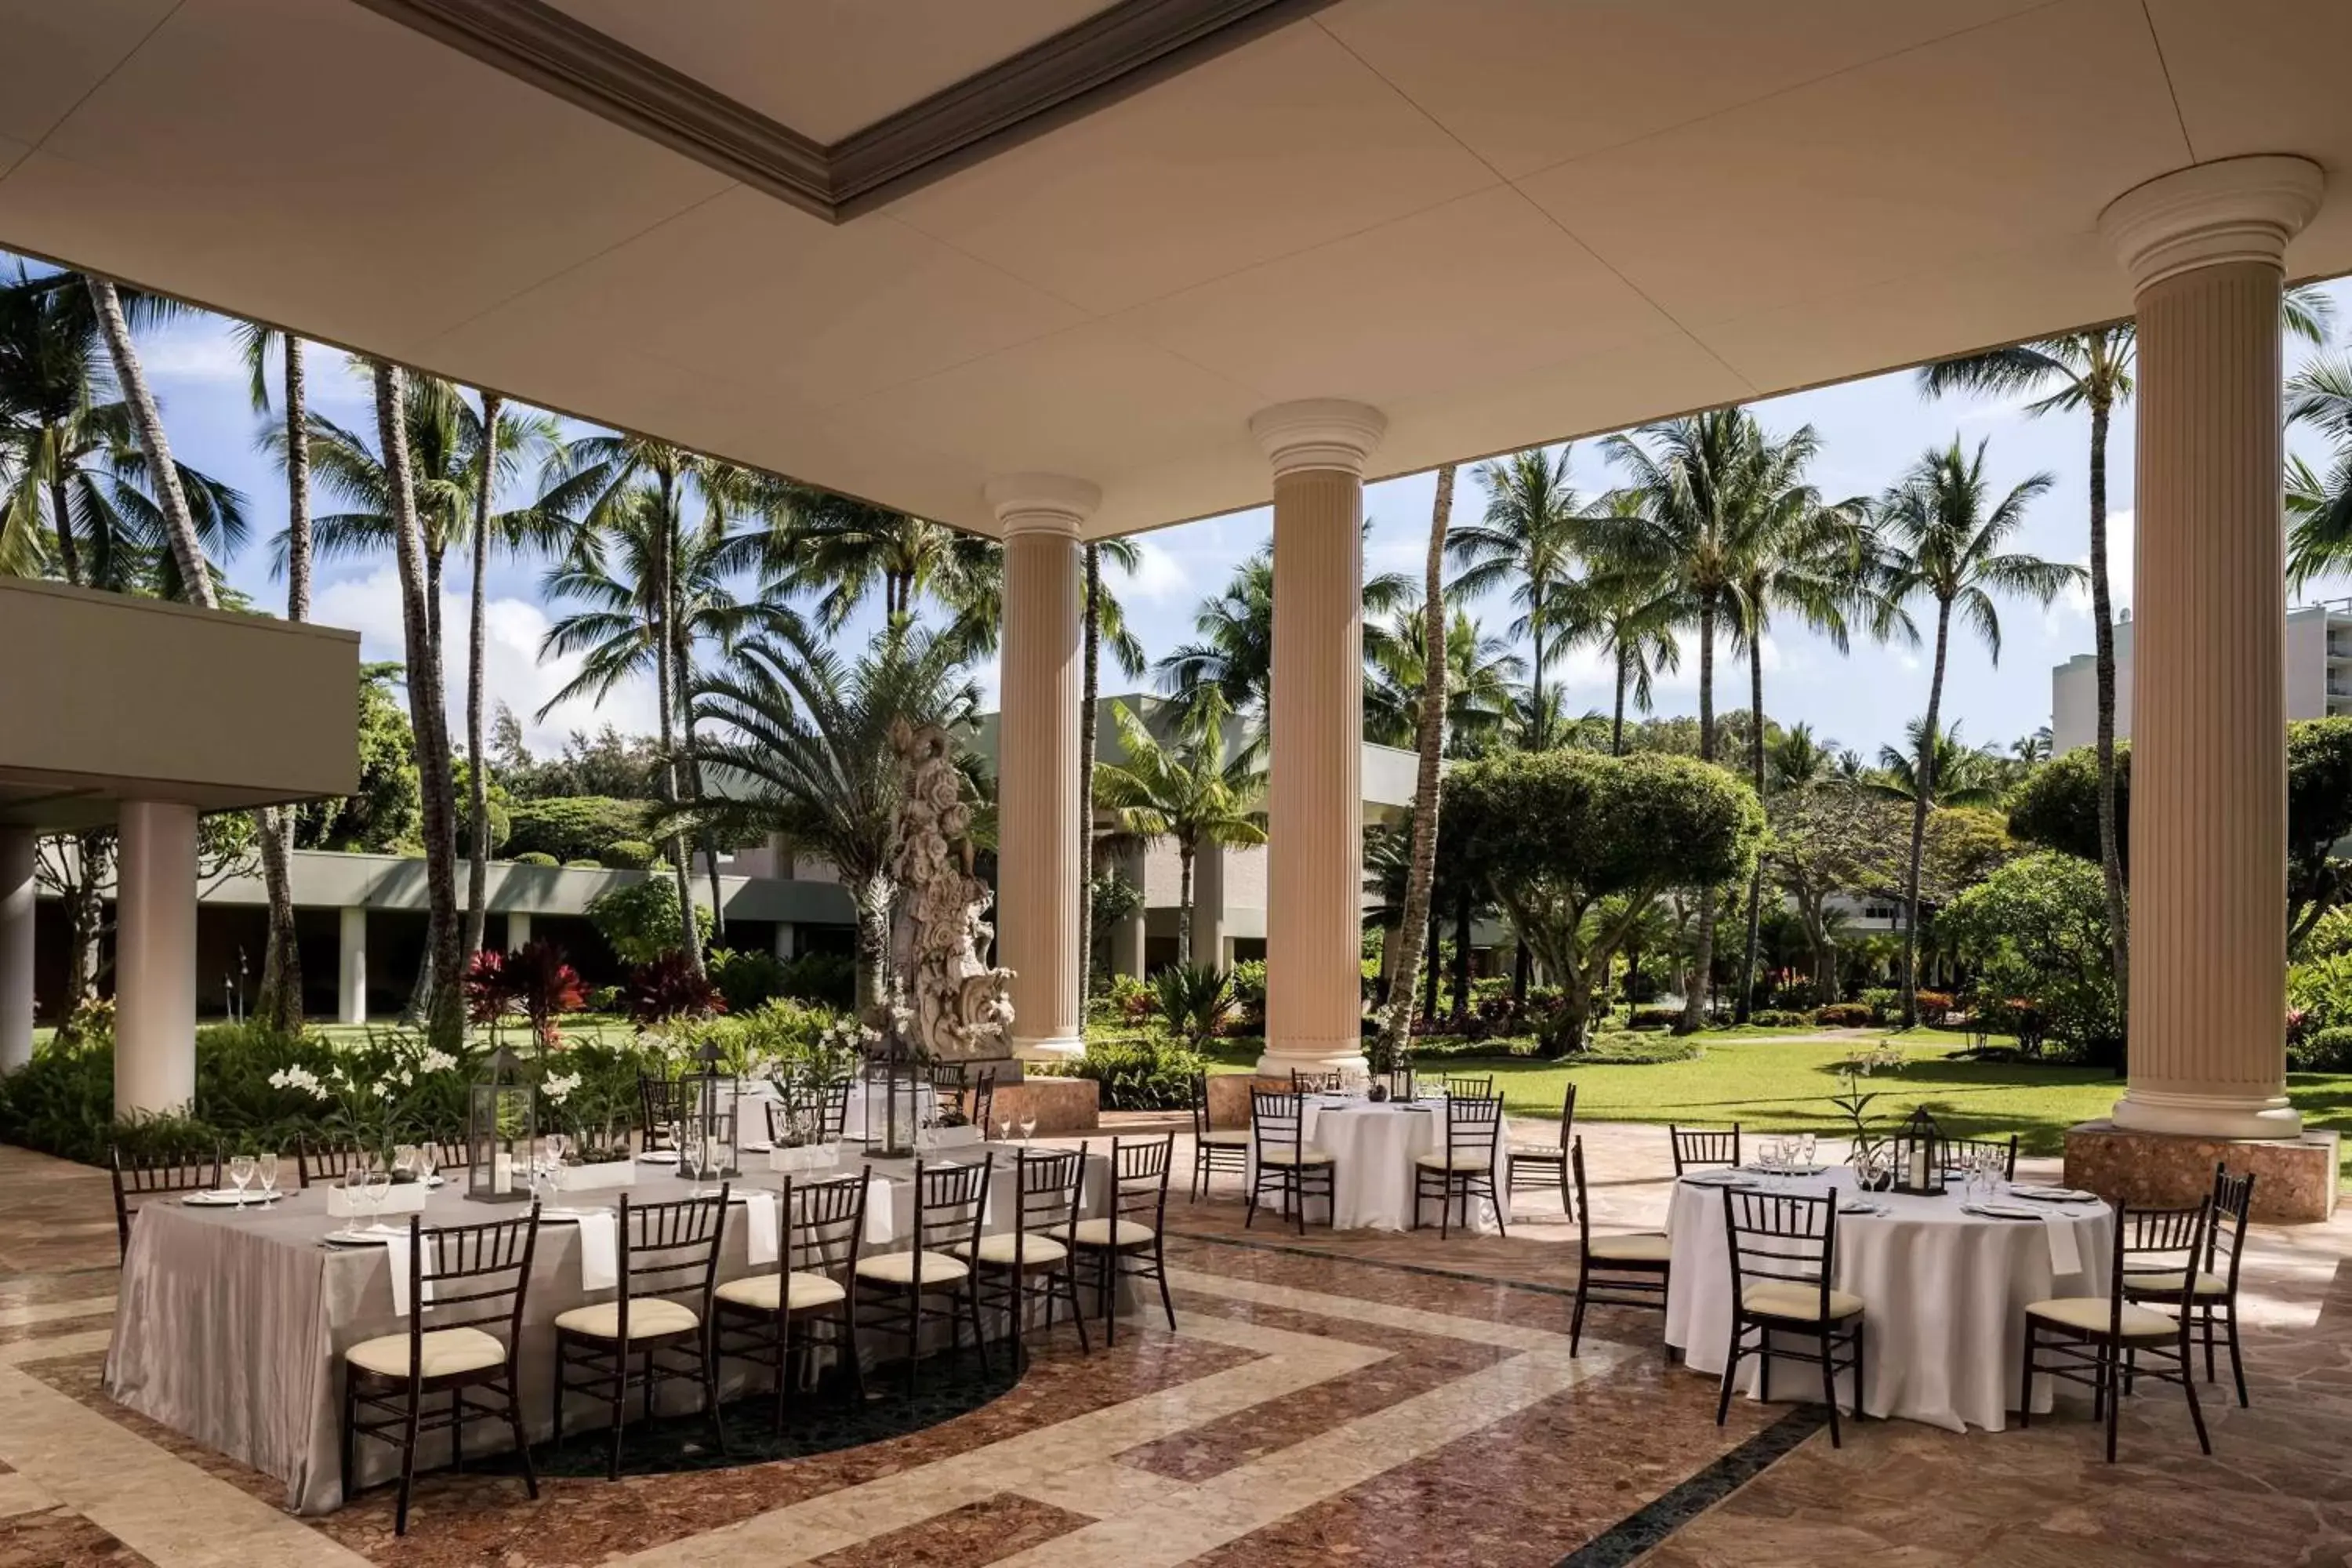 On site, Restaurant/Places to Eat in The Royal Sonesta Kauai Resort Lihue